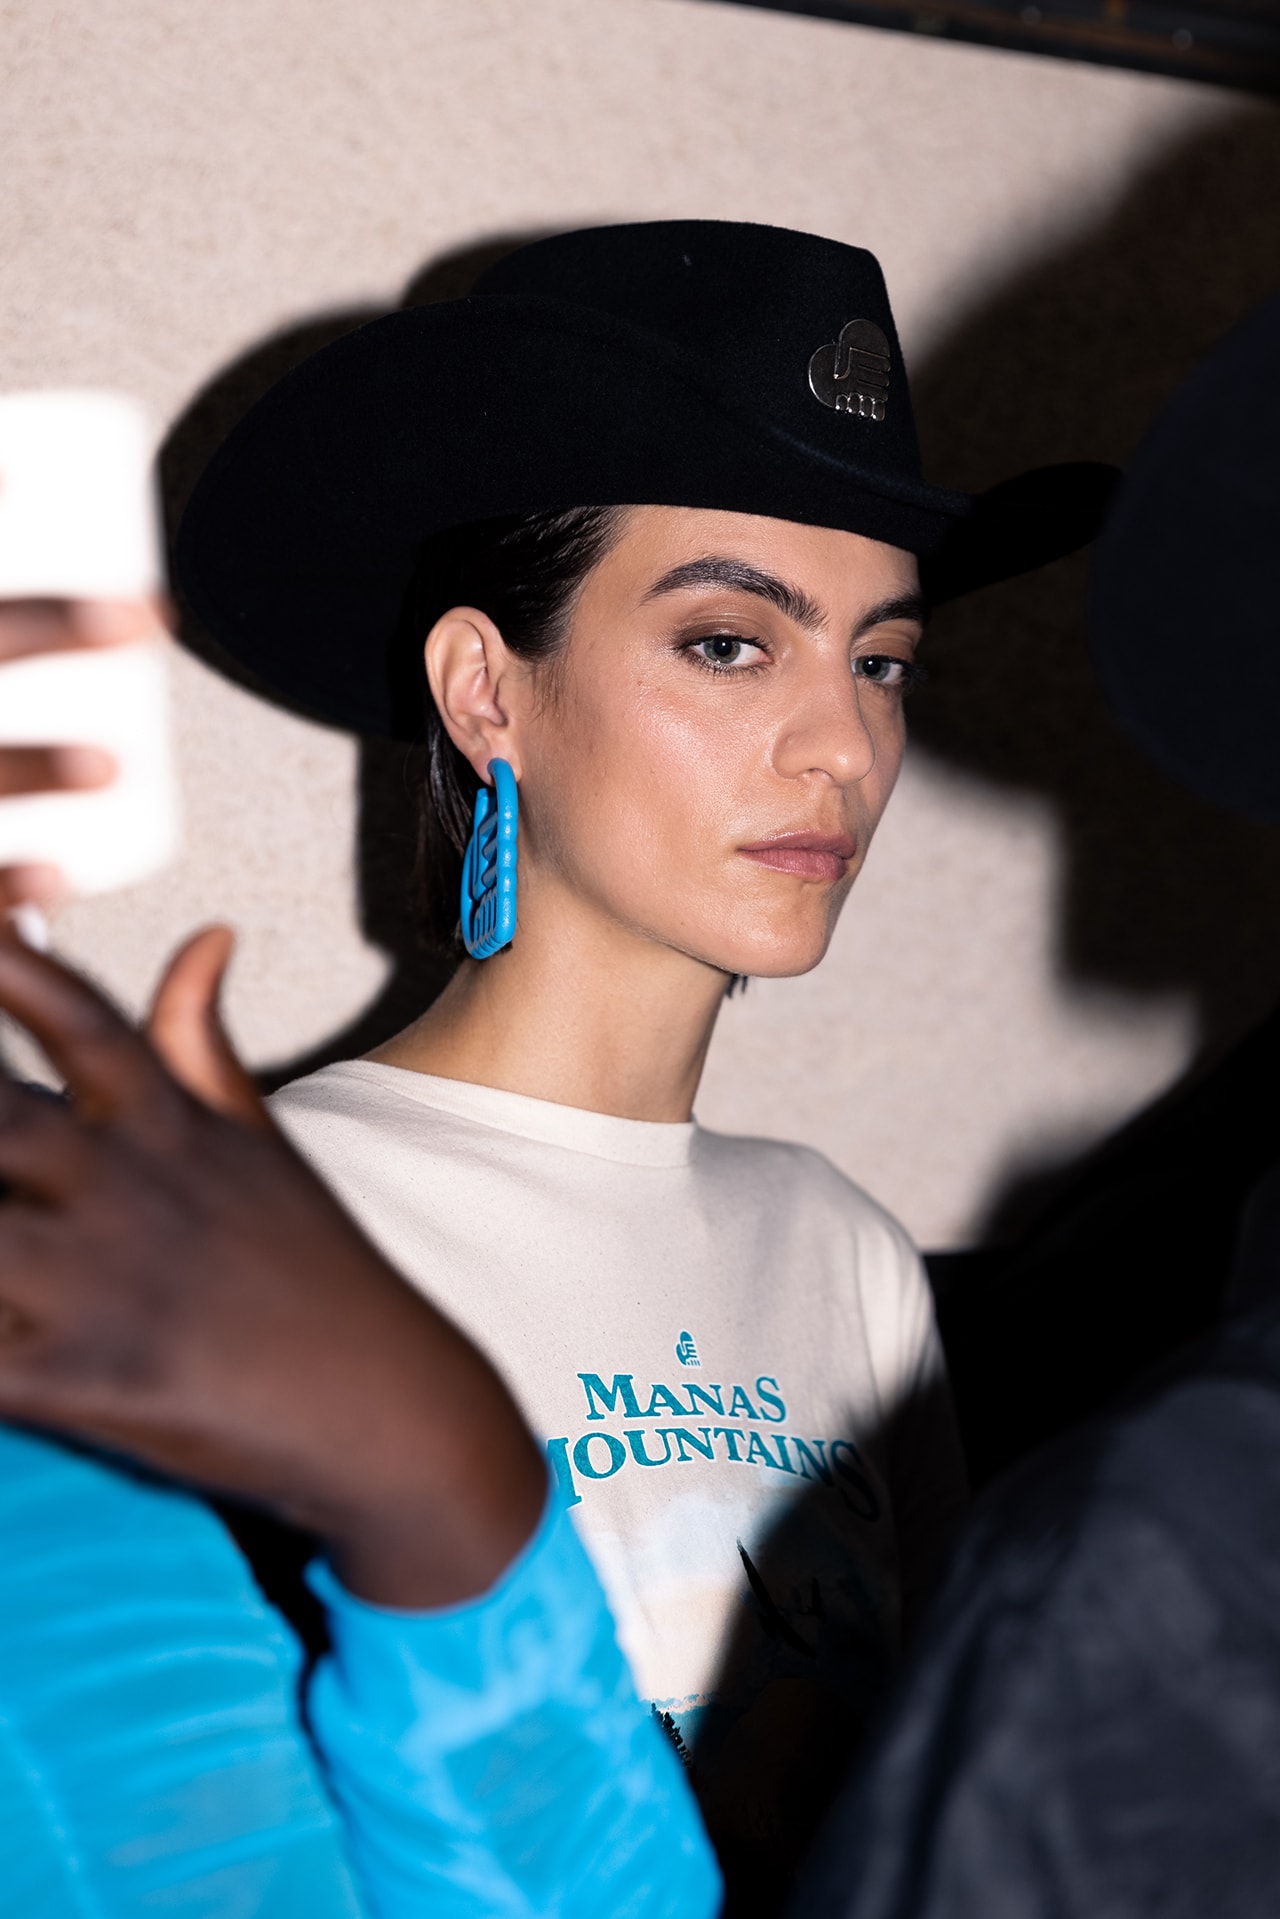 Ester Manas Spring Summer 2022 Collection Dress Different Paris Fashion Week Debut Show Yellow Dress Logo Earrings 